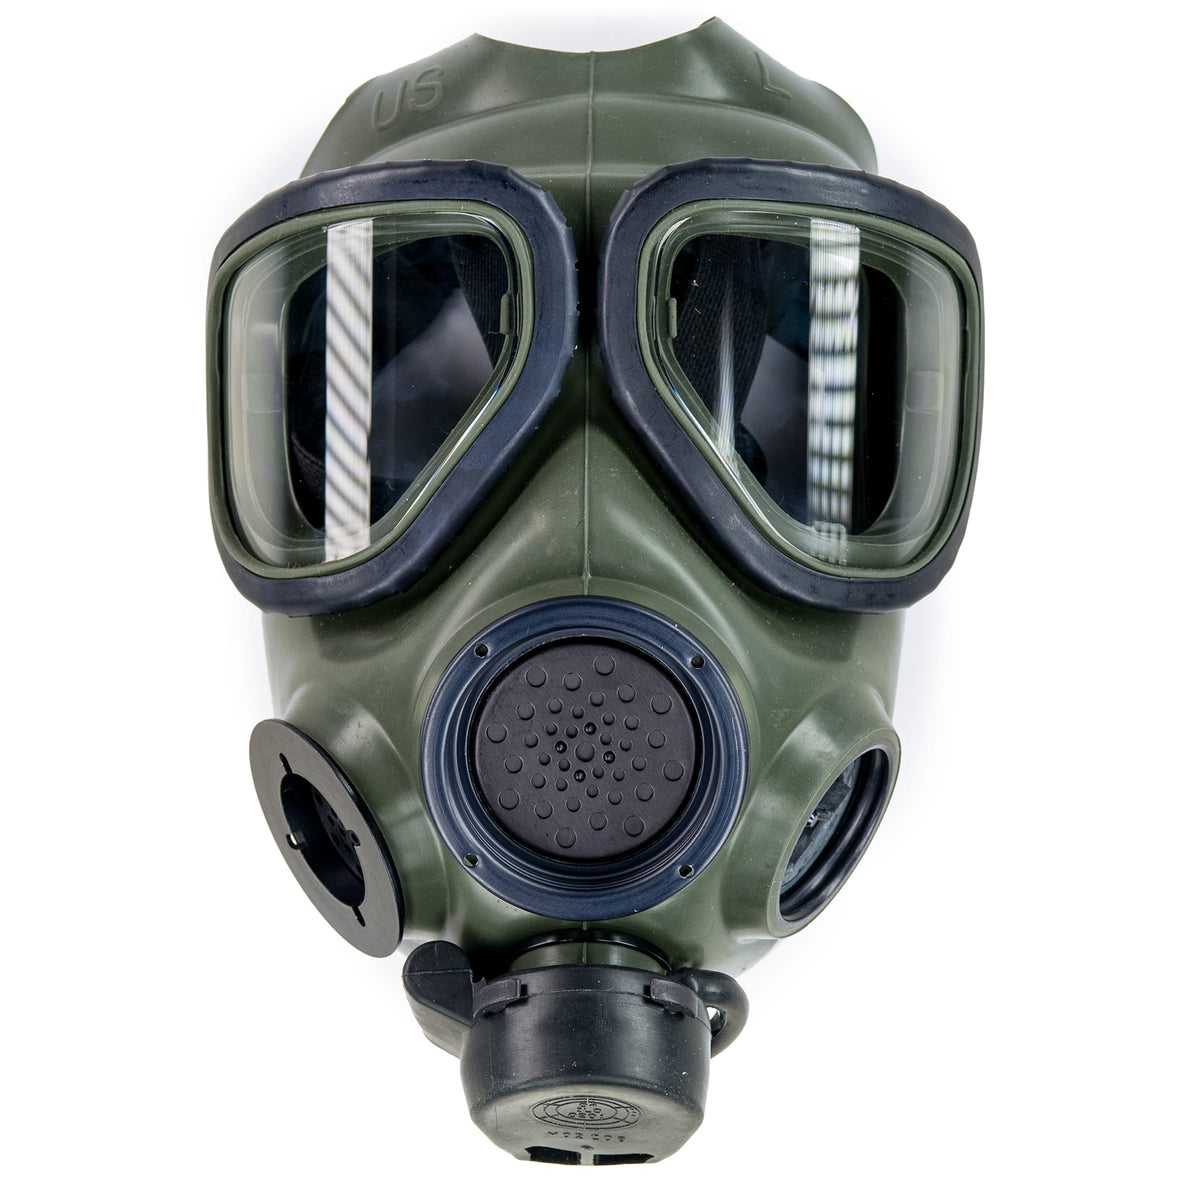 die young game gas mask